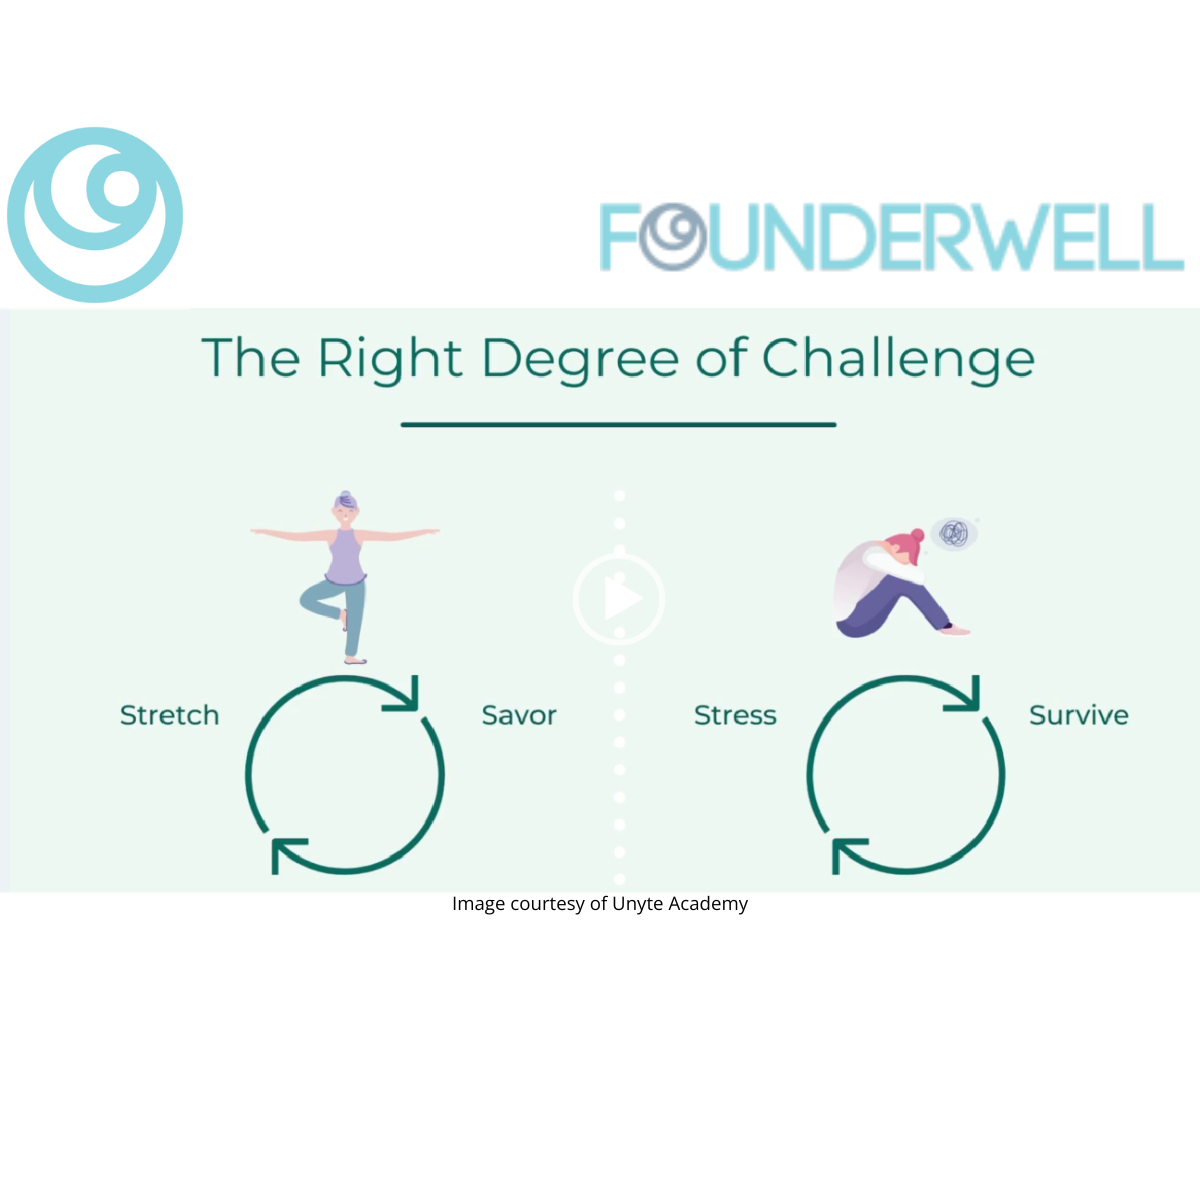 The Right Degree of Challenge